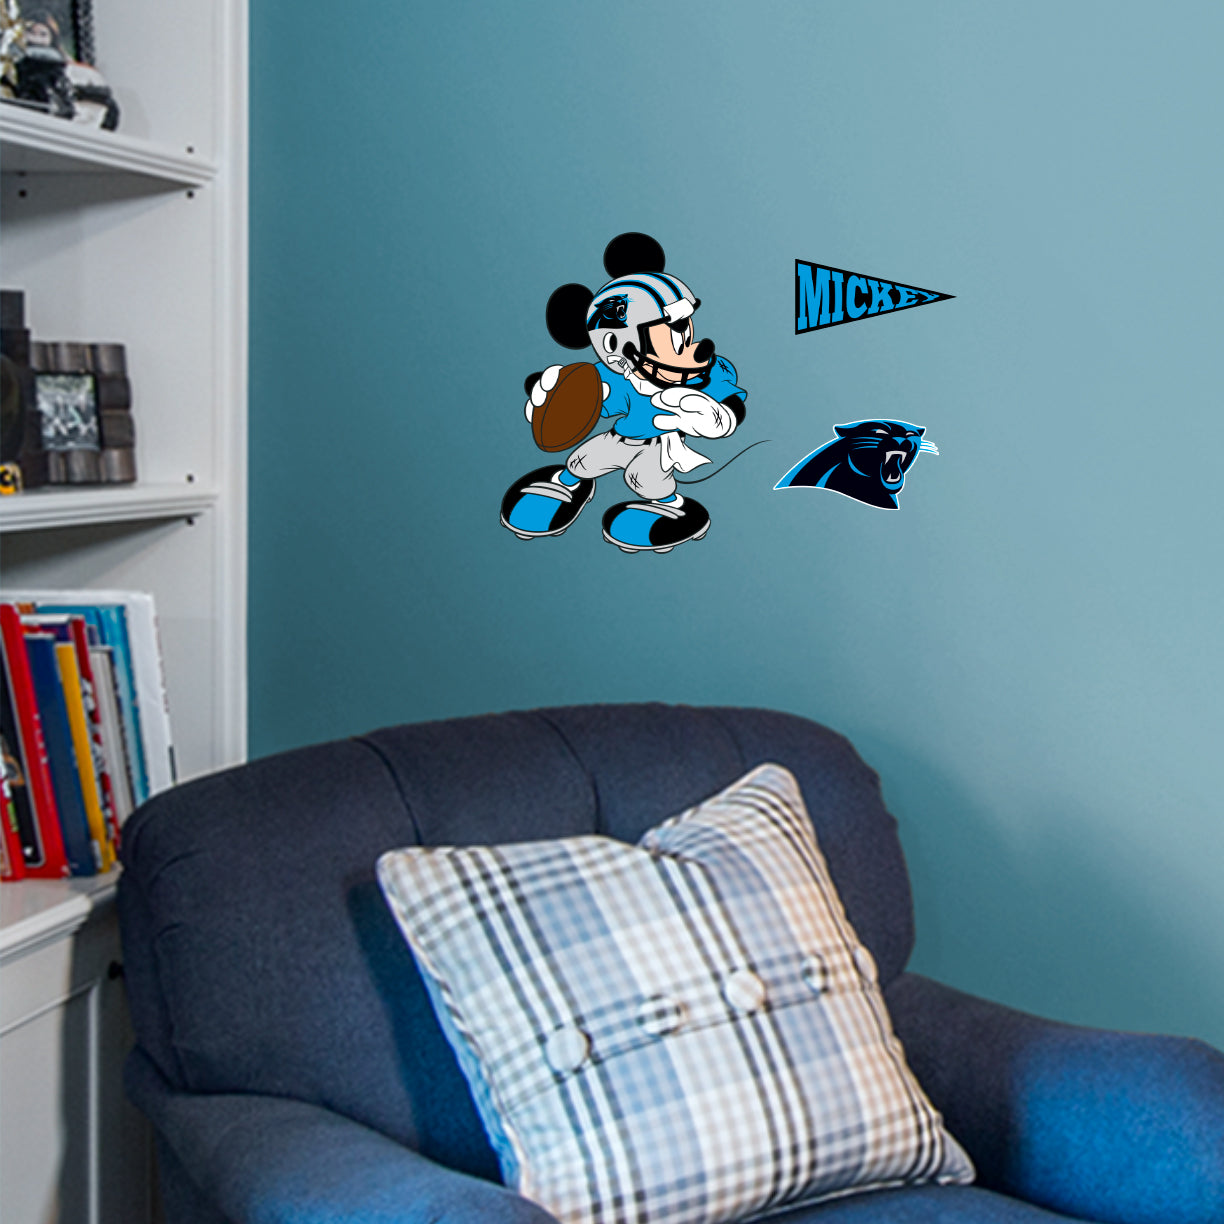 Carolina Panthers: Mickey Mouse - Officially Licensed NFL Removable Adhesive Decal